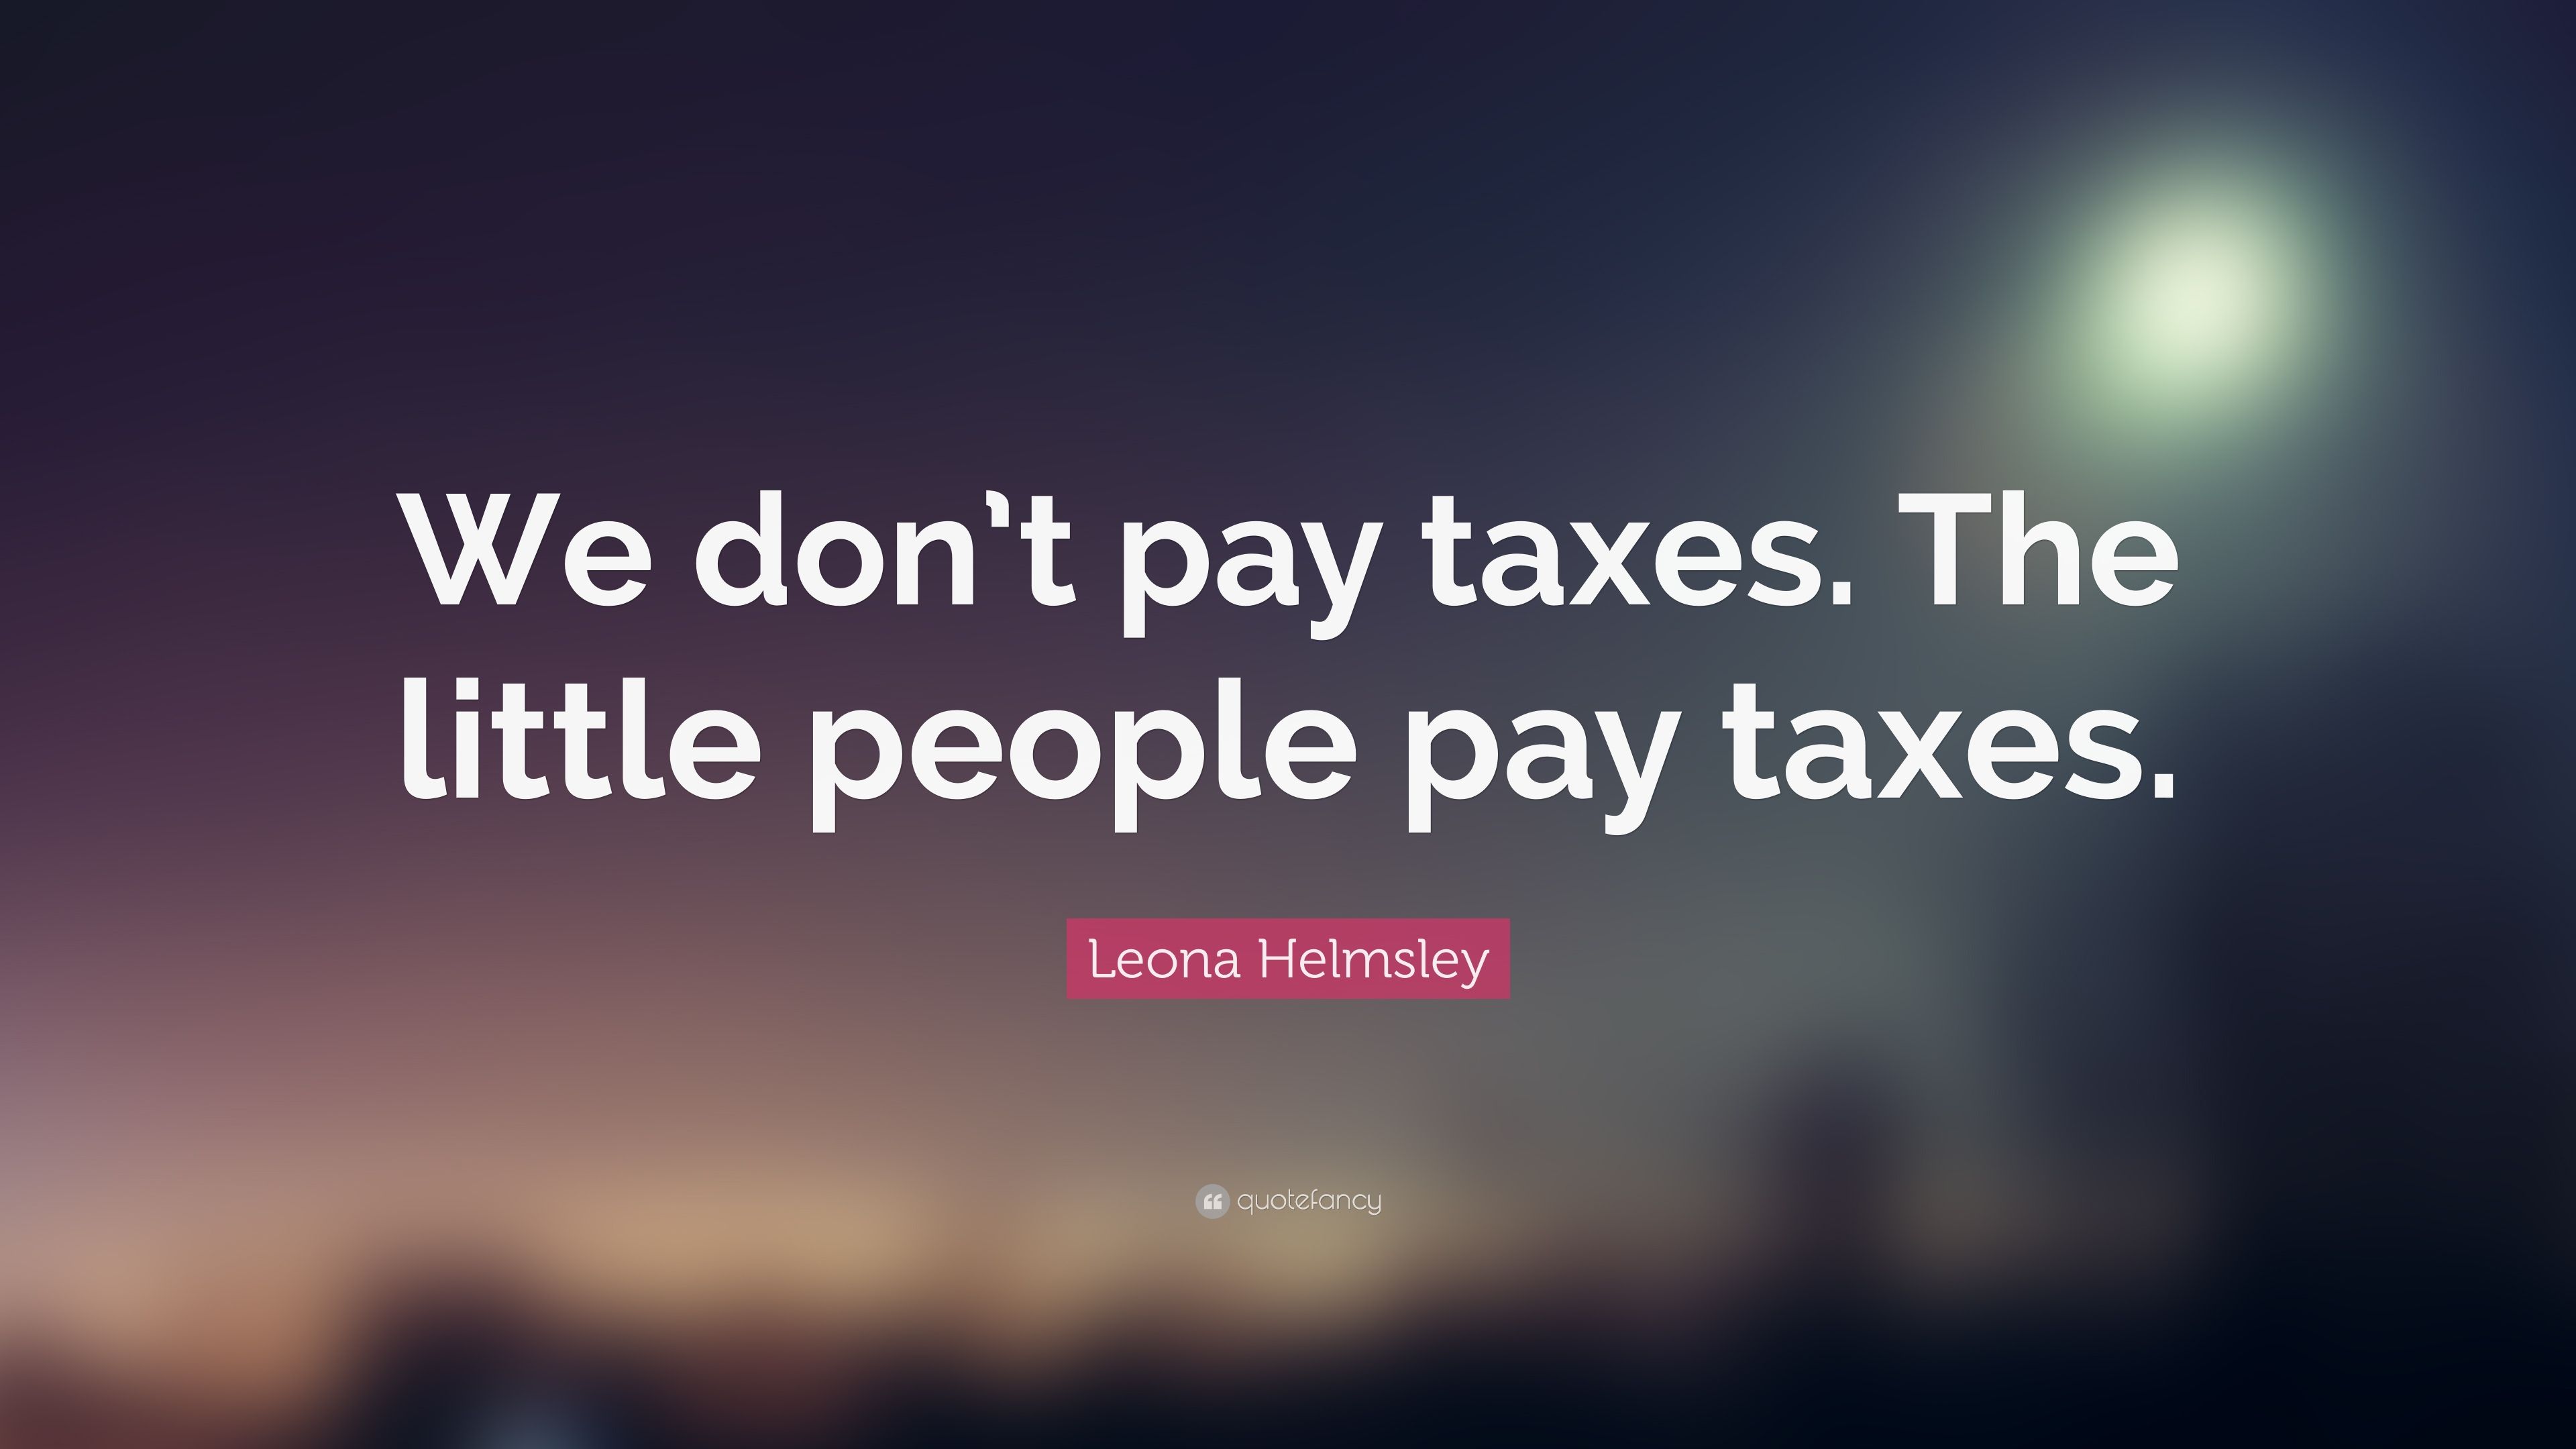 Leona Helmsley Quote: “We don't pay taxes. The little people pay taxes.” (7 wallpaper)